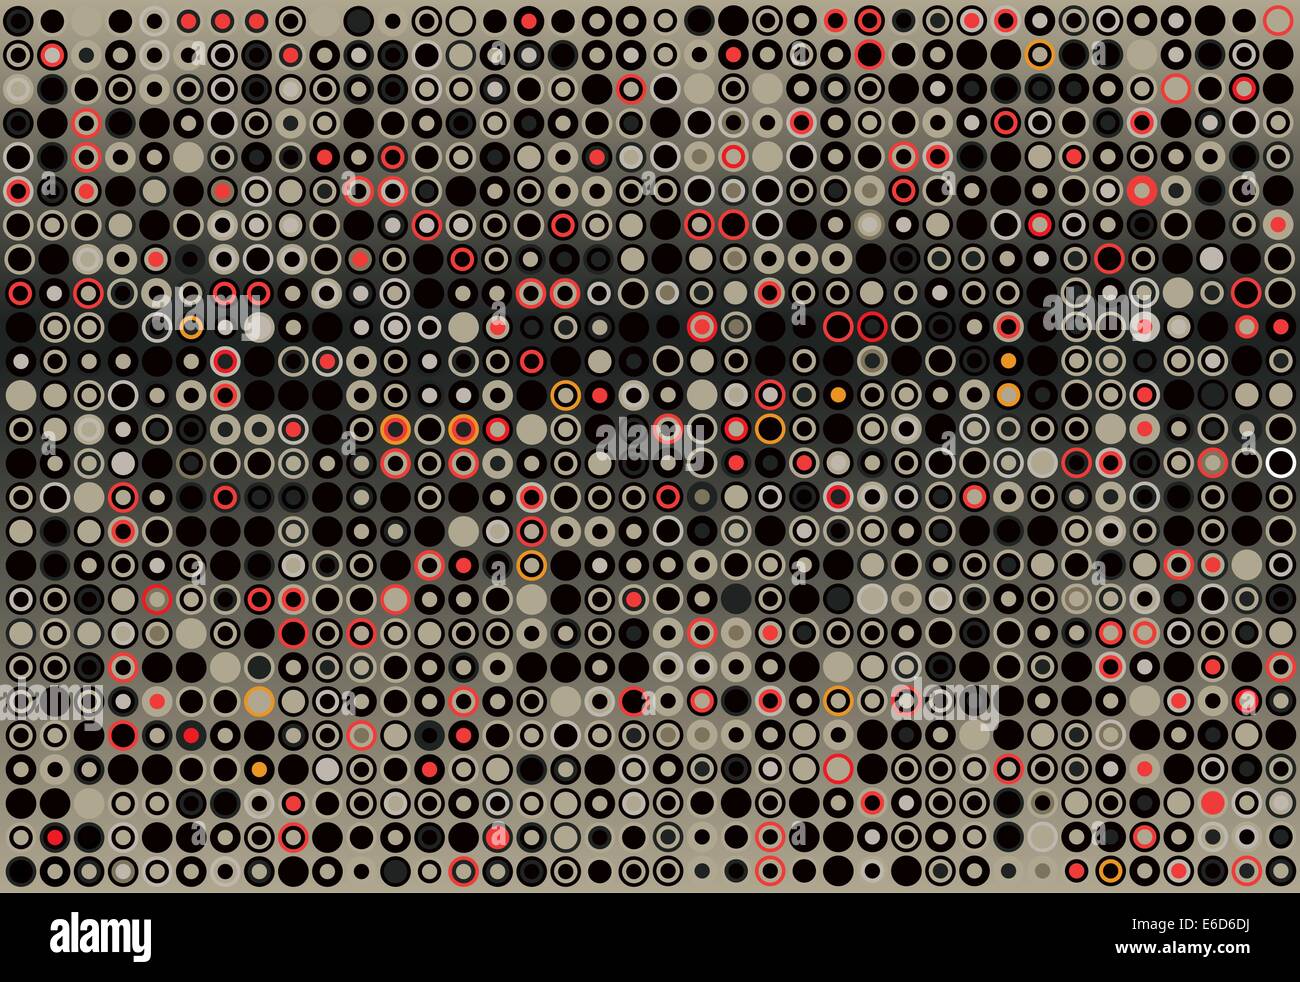 Abstract editable vector background of gray and red dots Stock Vector